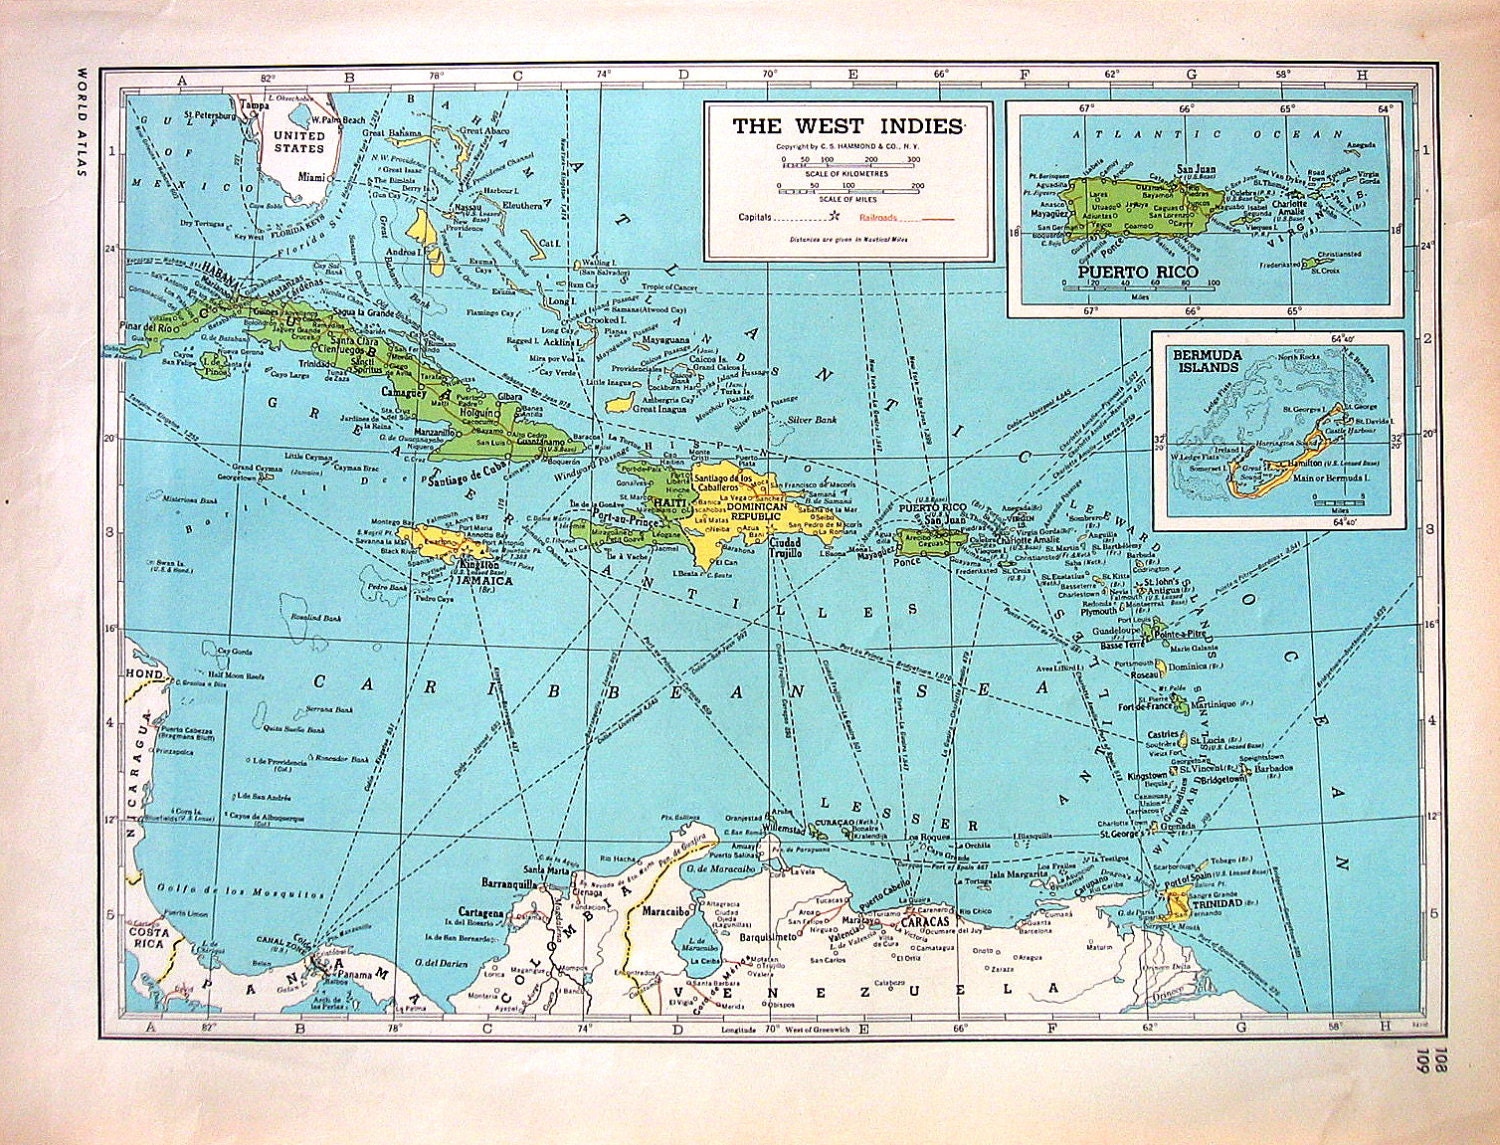 Map of The West Indies Puerto Rico Bermuda Islands Map of